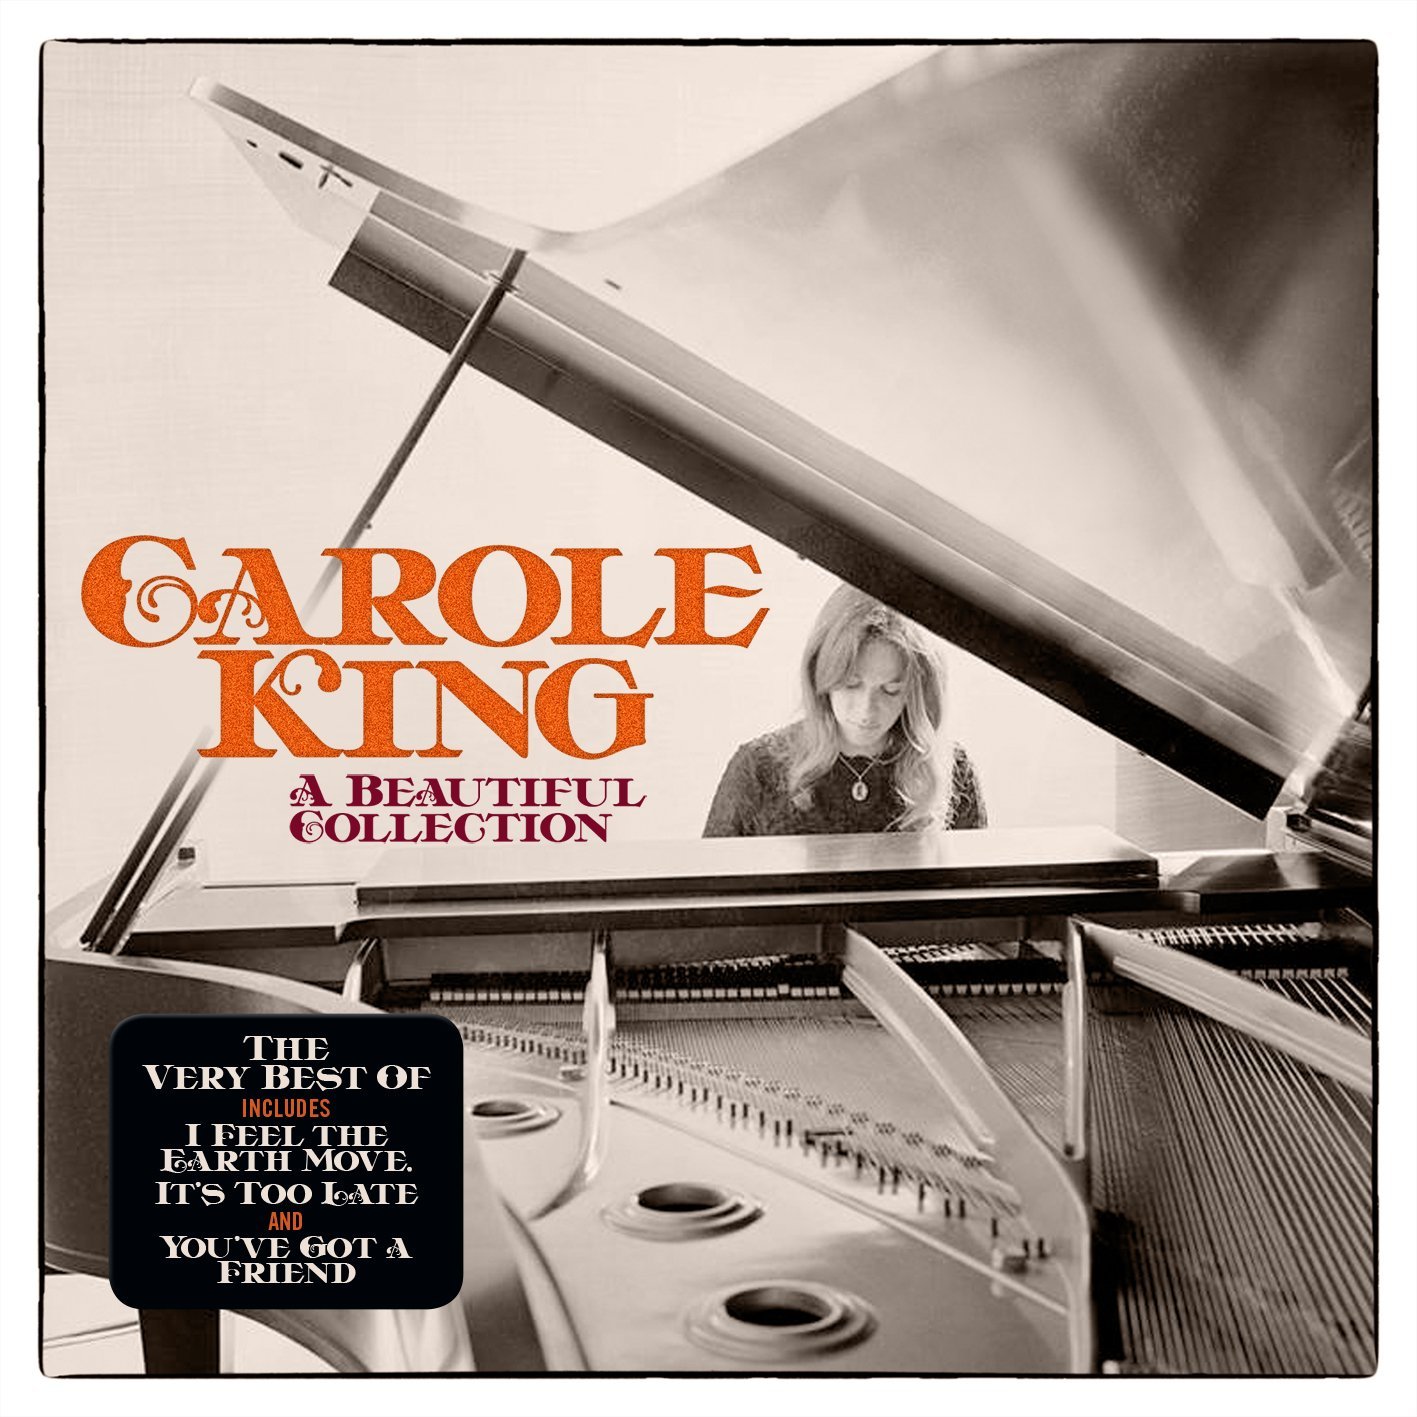 A beautiful collection – best of Carole King